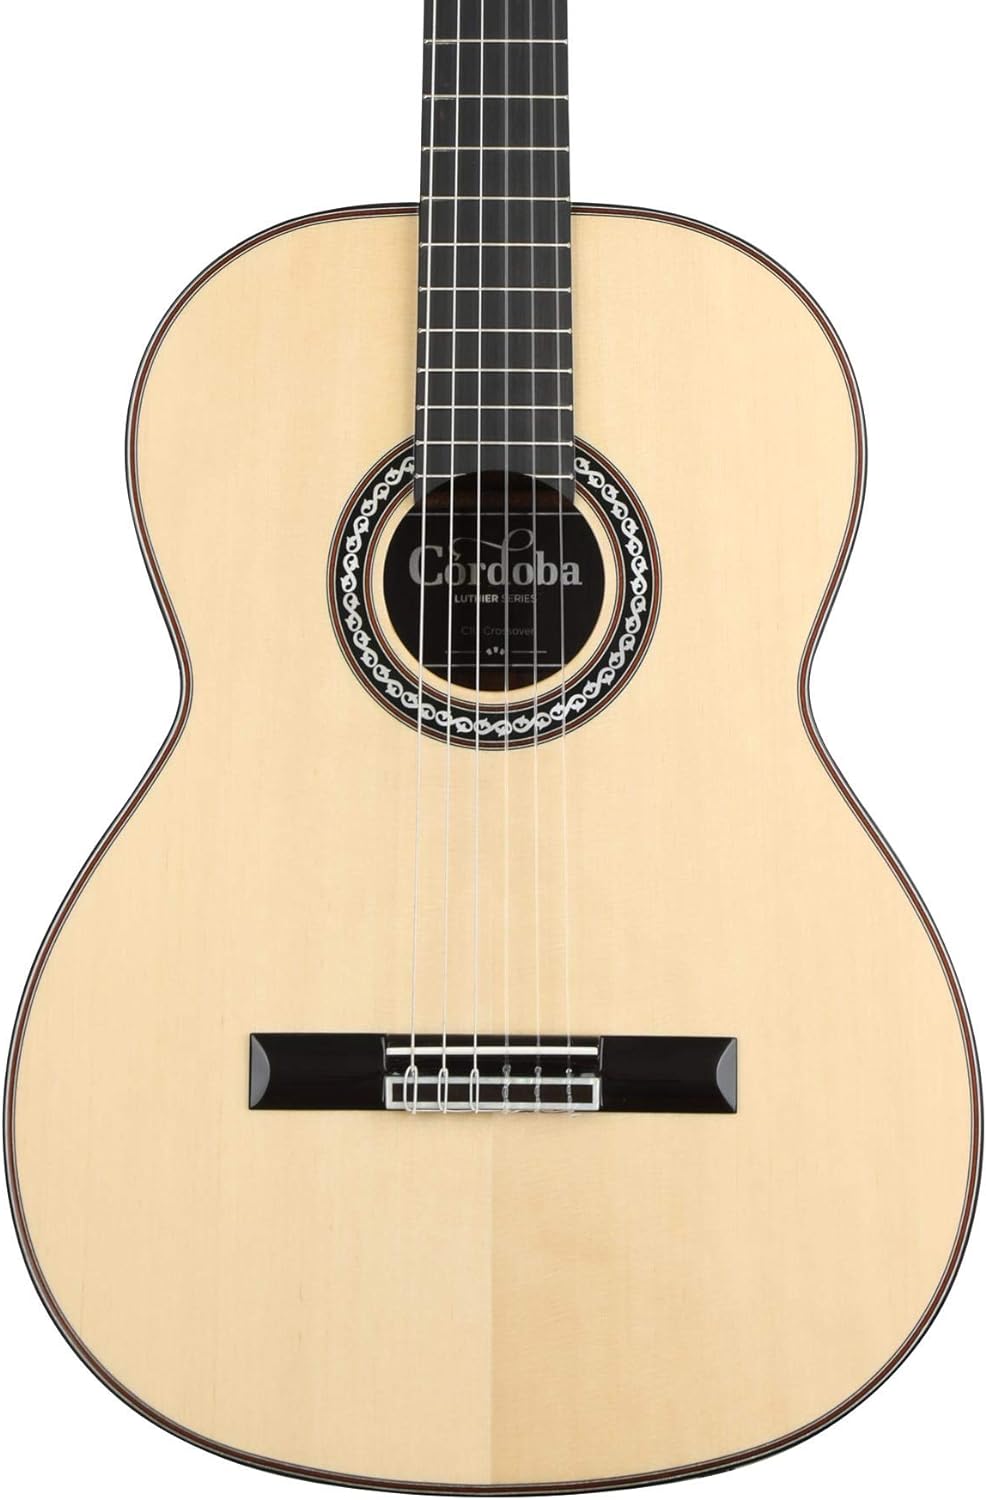 Cordoba C10 Crossover Nylon String Acoustic Guitar - Solid European Spruce Top, Solid Rosewood Back & Sides | Zoso Music Sdn Bhd